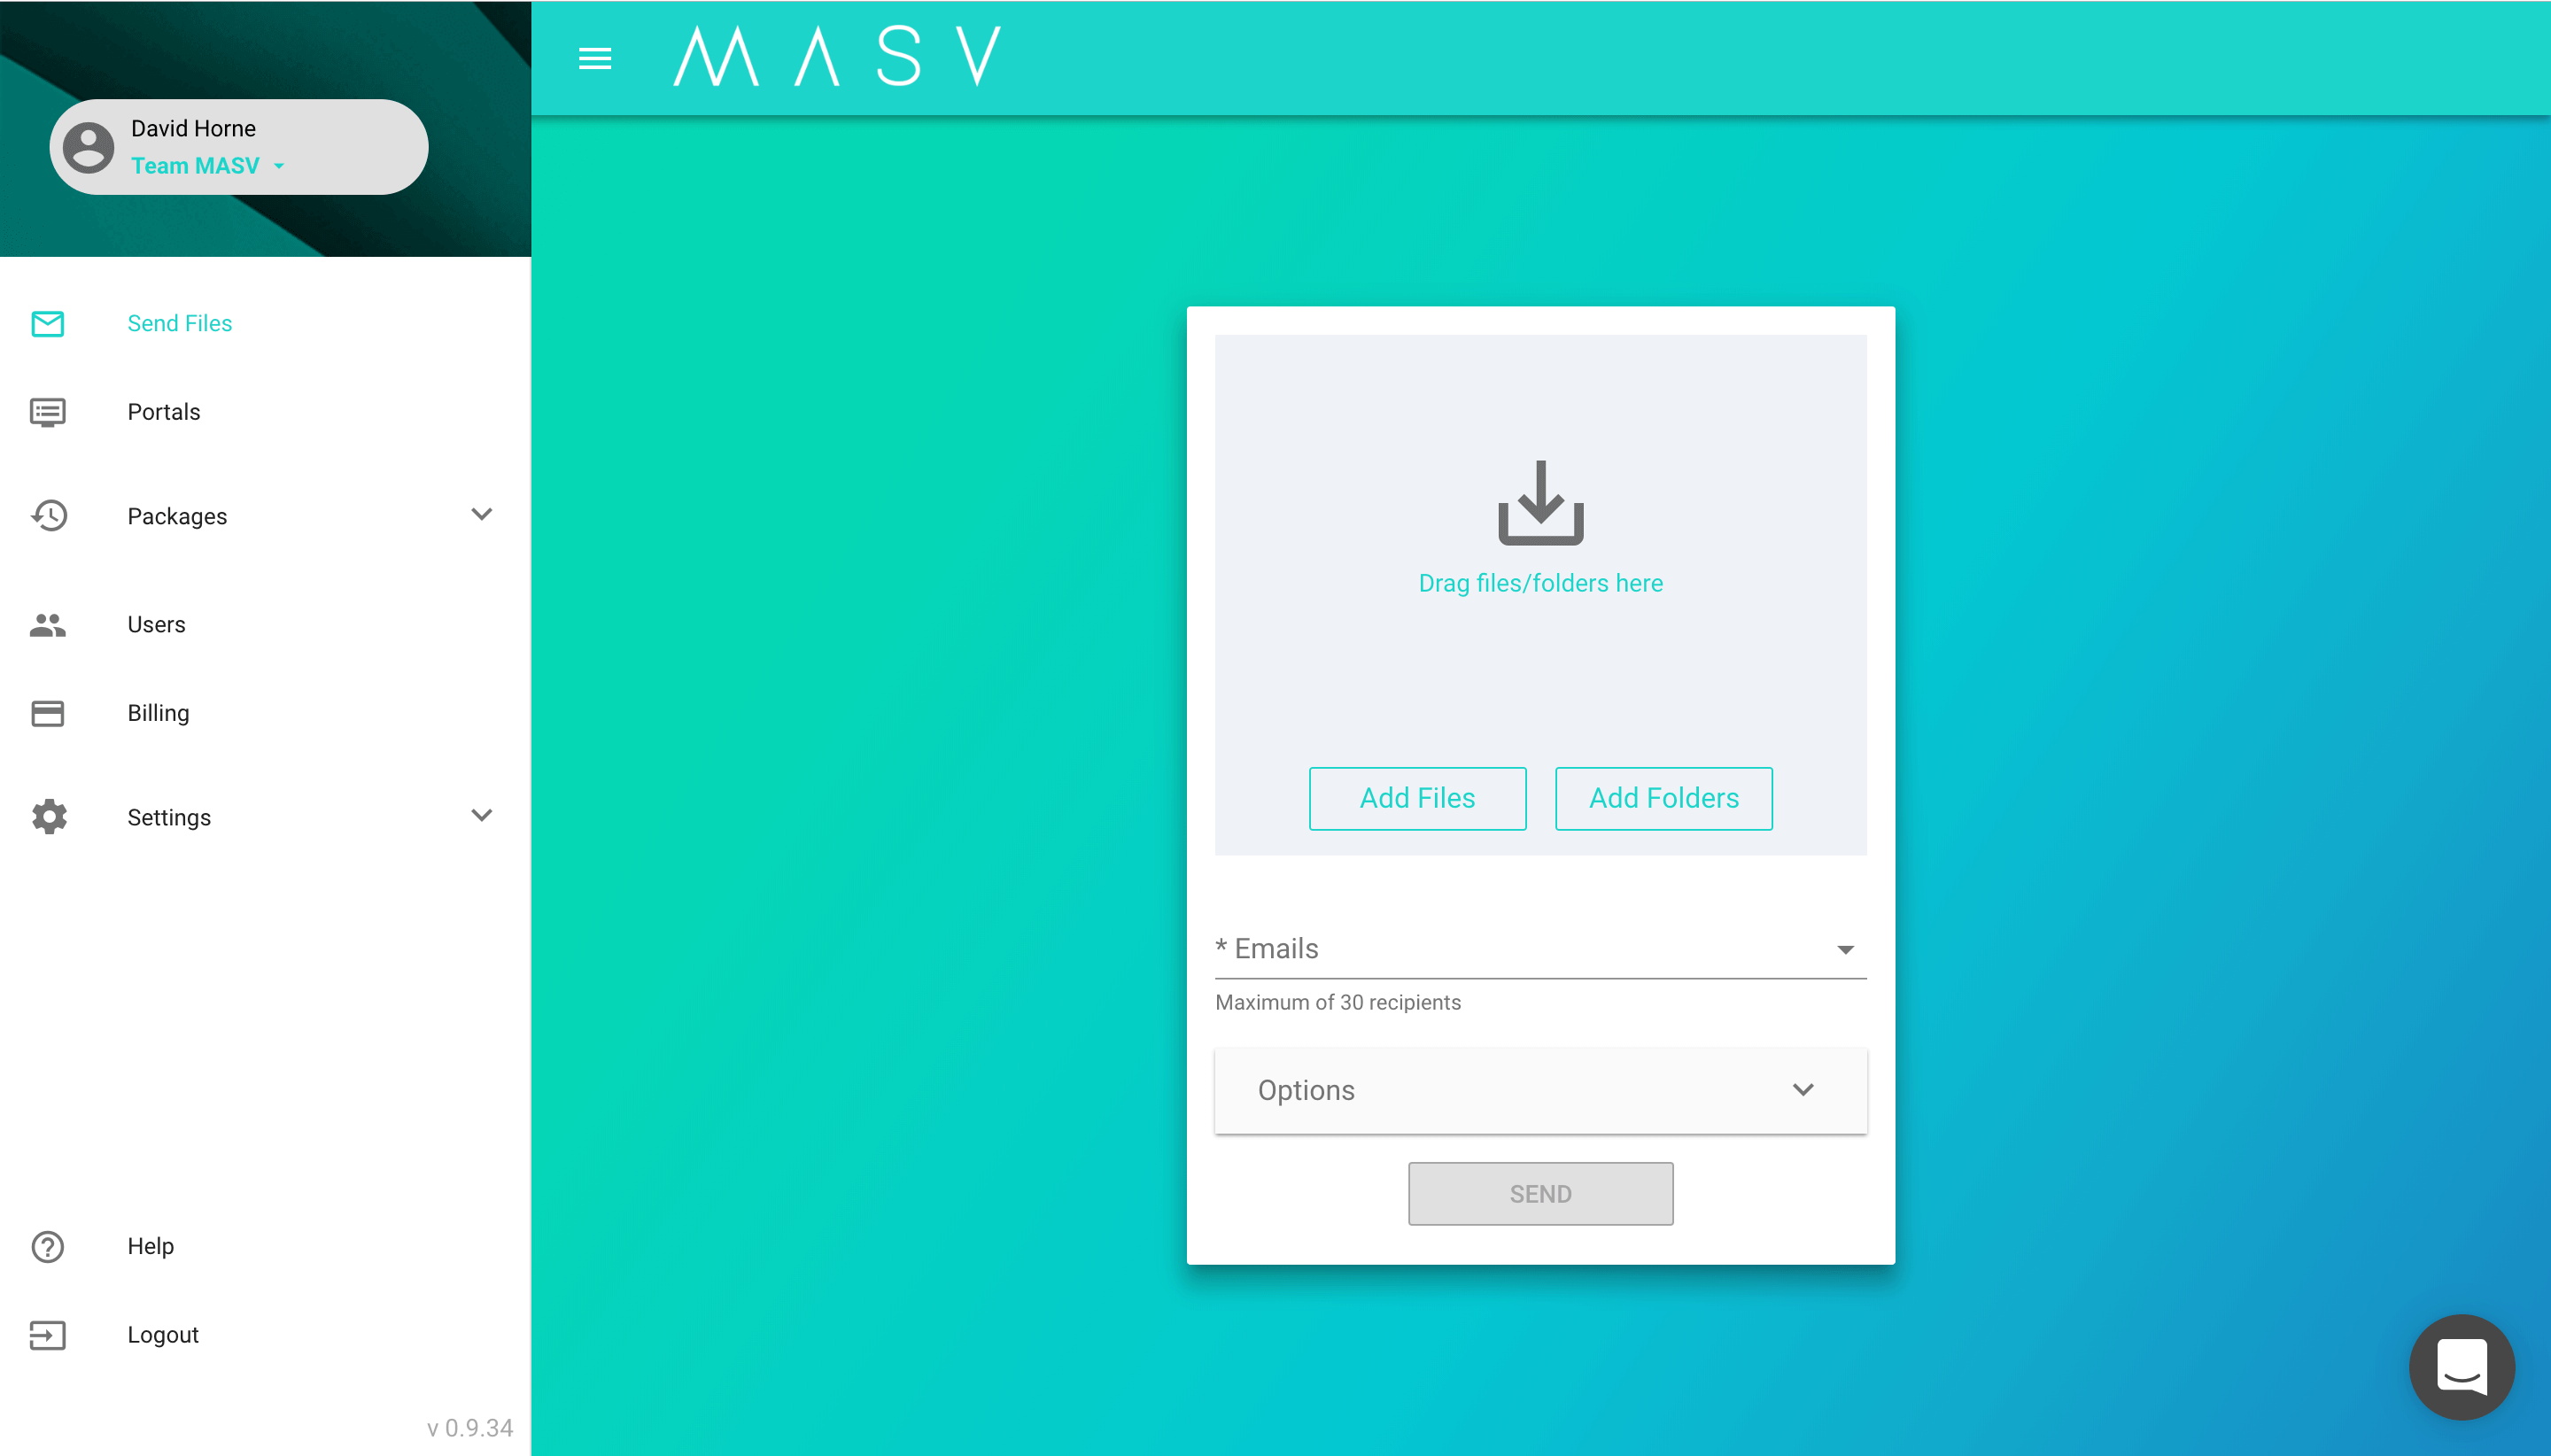 MASV is designed to be intuitive, so your film festivals crew can use it without any friction